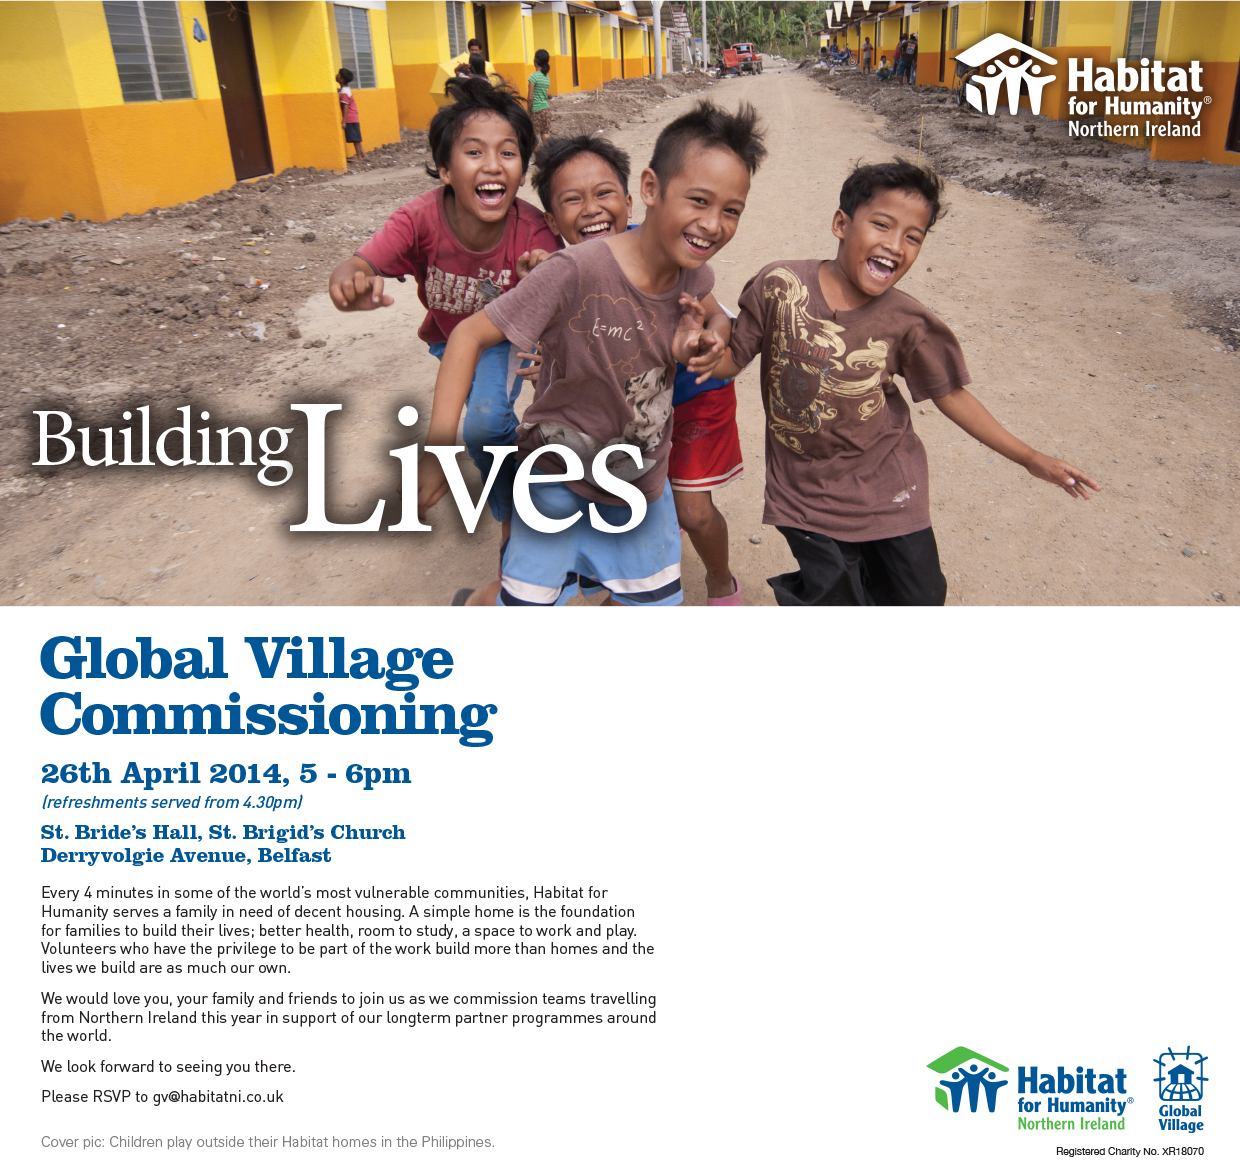 A leaflet with various detals of the global village commissioning service. The leaflet also includes a photo of four smiling children from Cambodia.